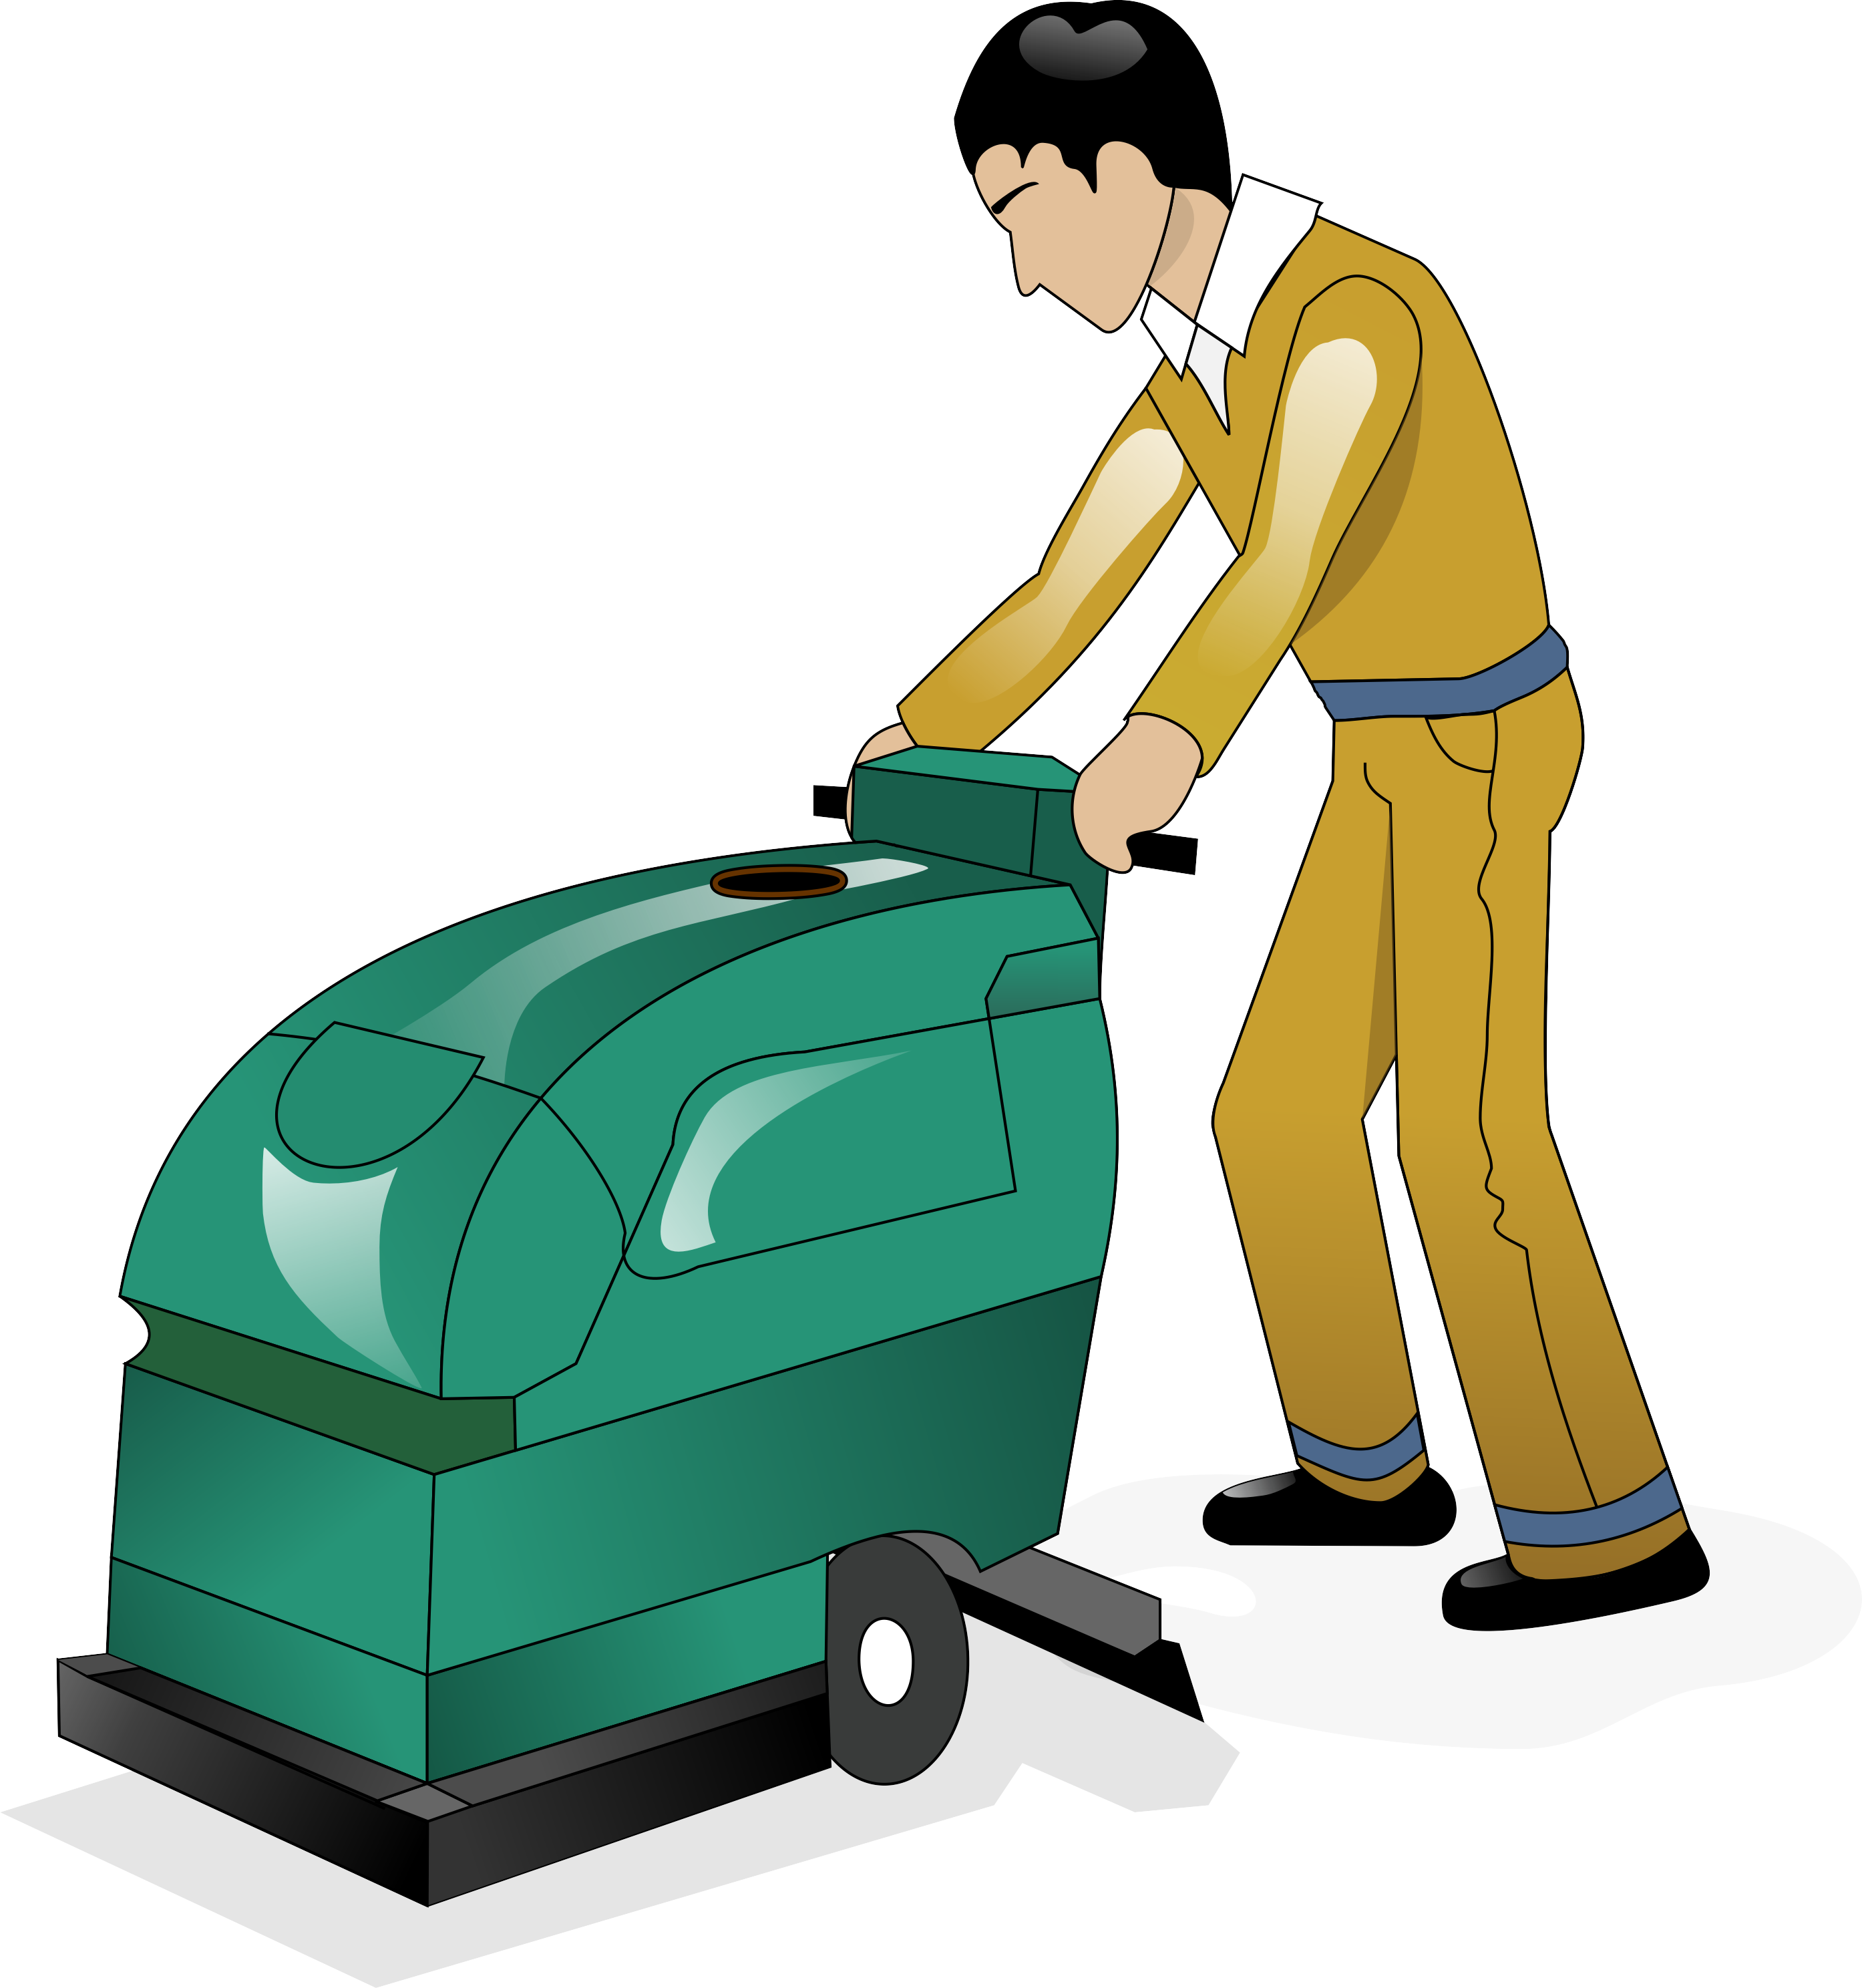 Janitor clipart floor cleaning. On target maintenance commercial